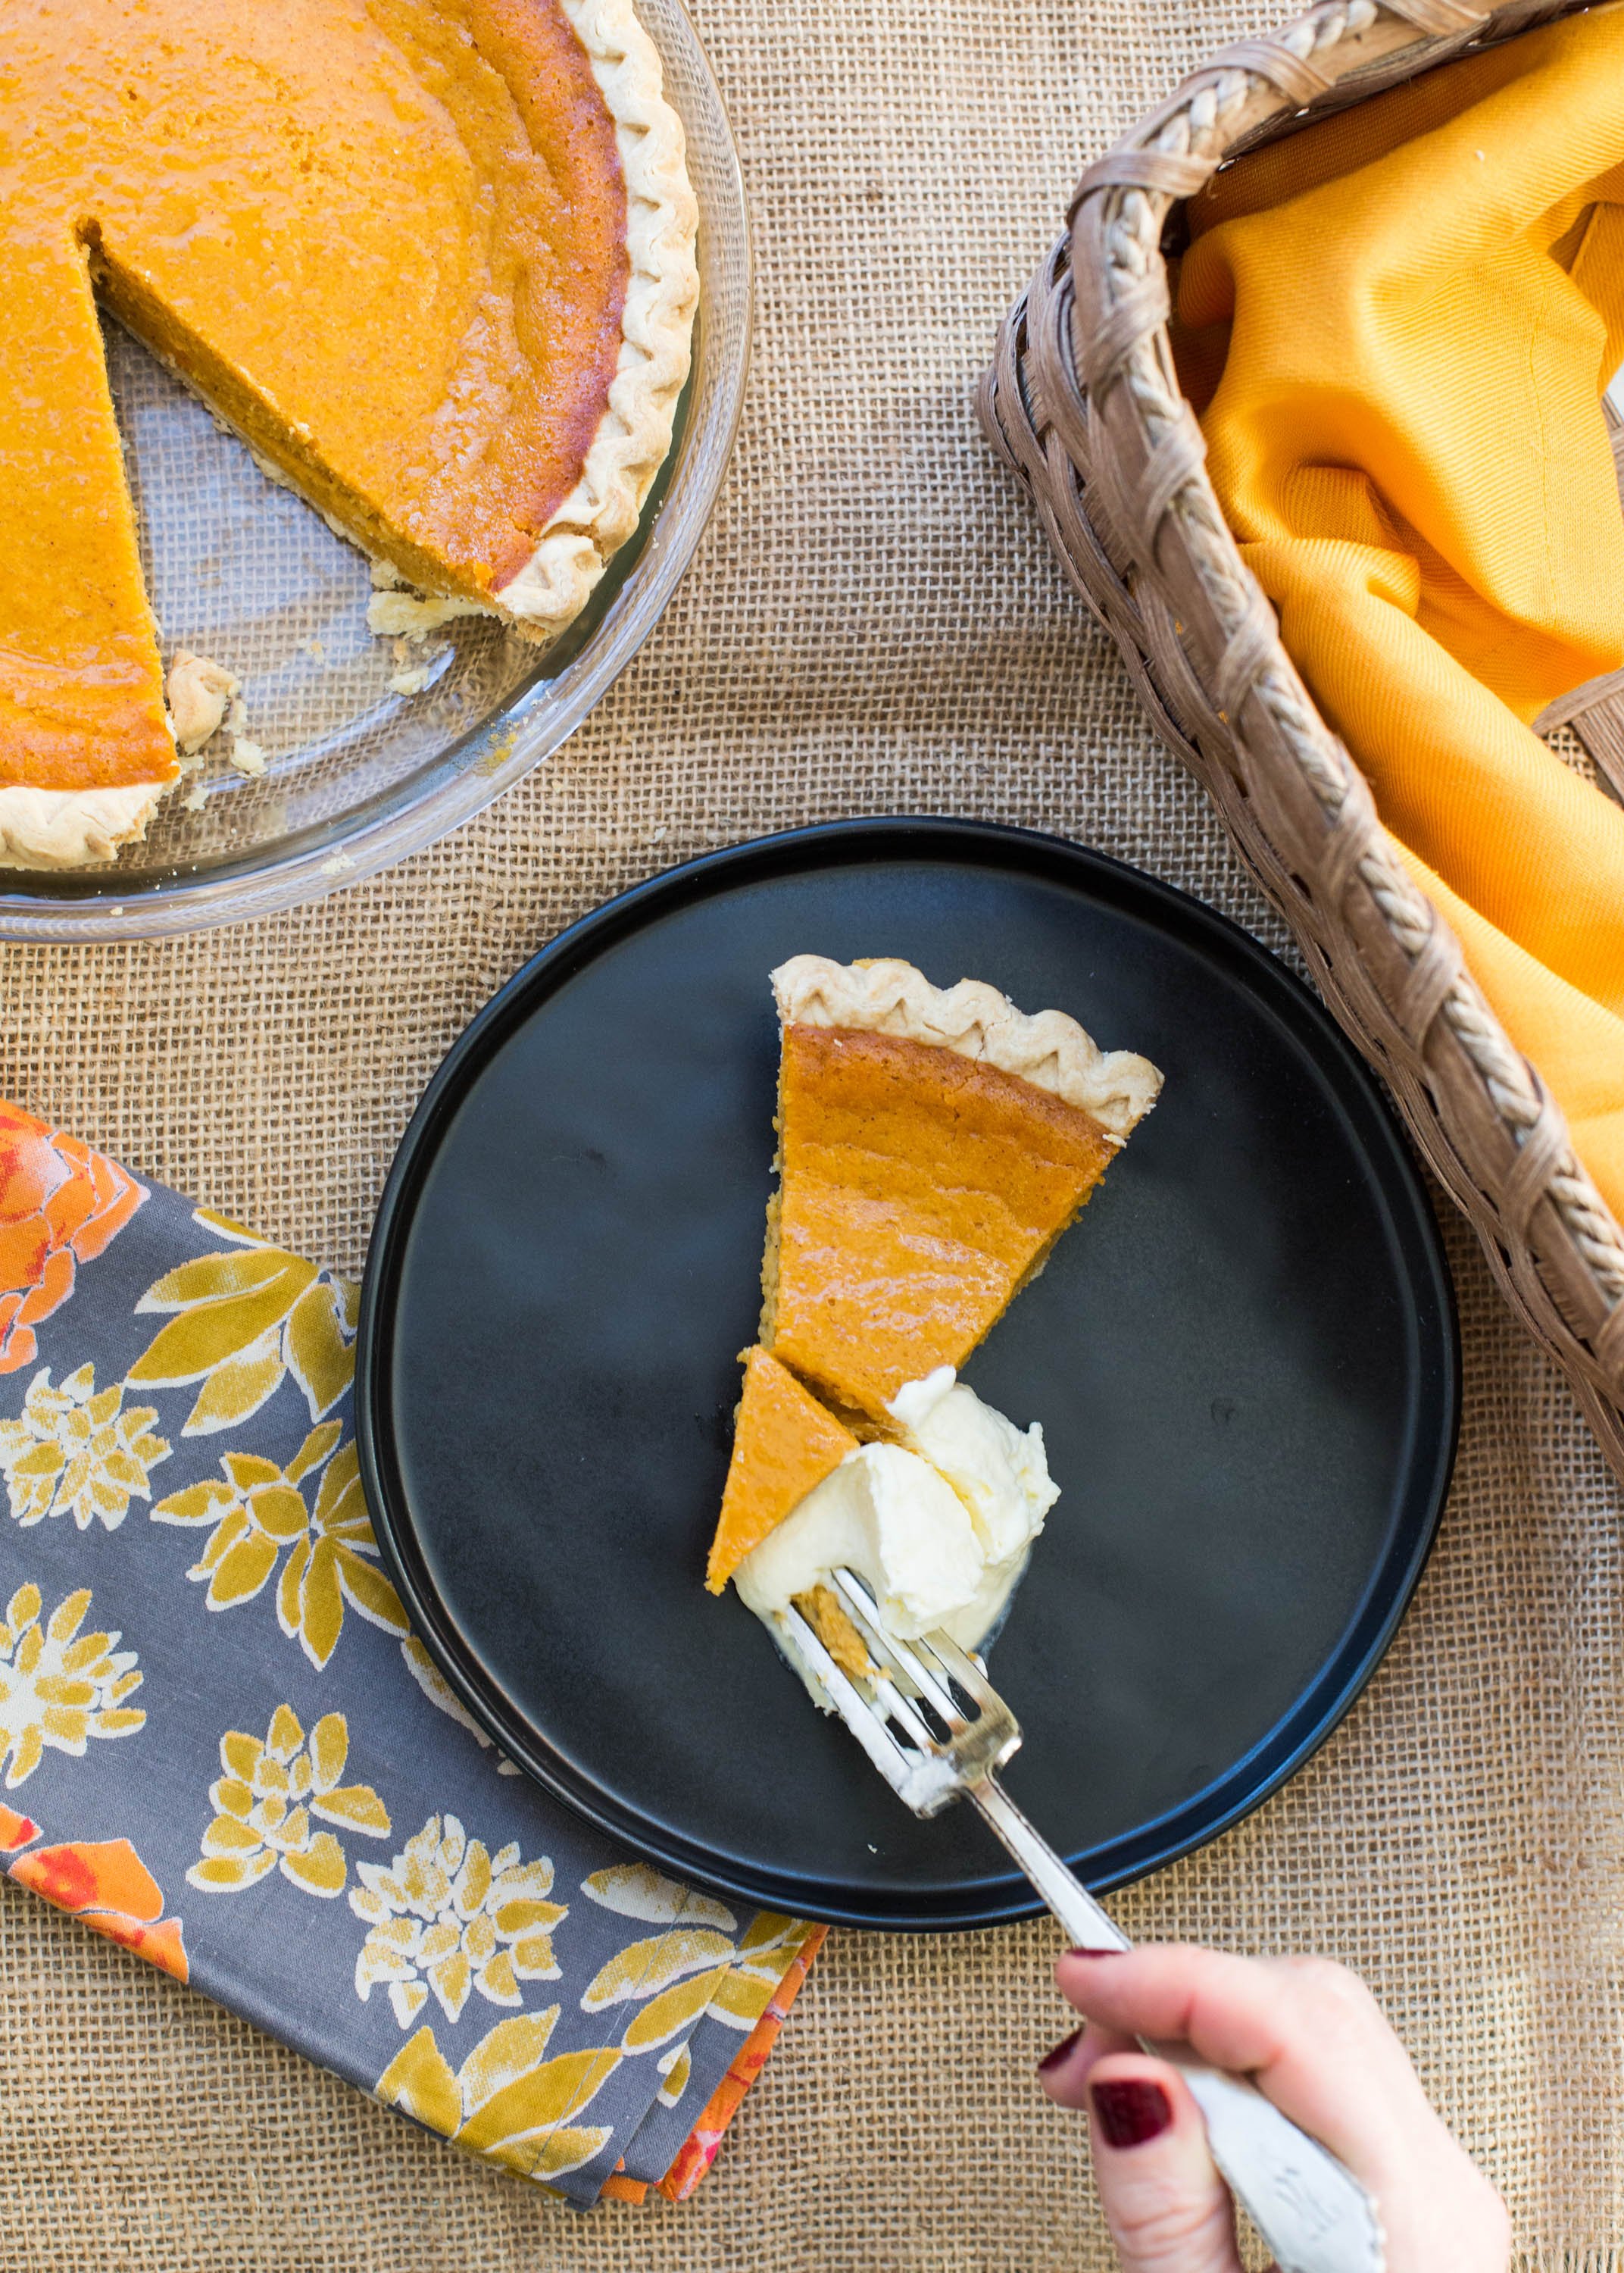 Woman about to scoop up a bite of sweet potato pie with whipped cream.